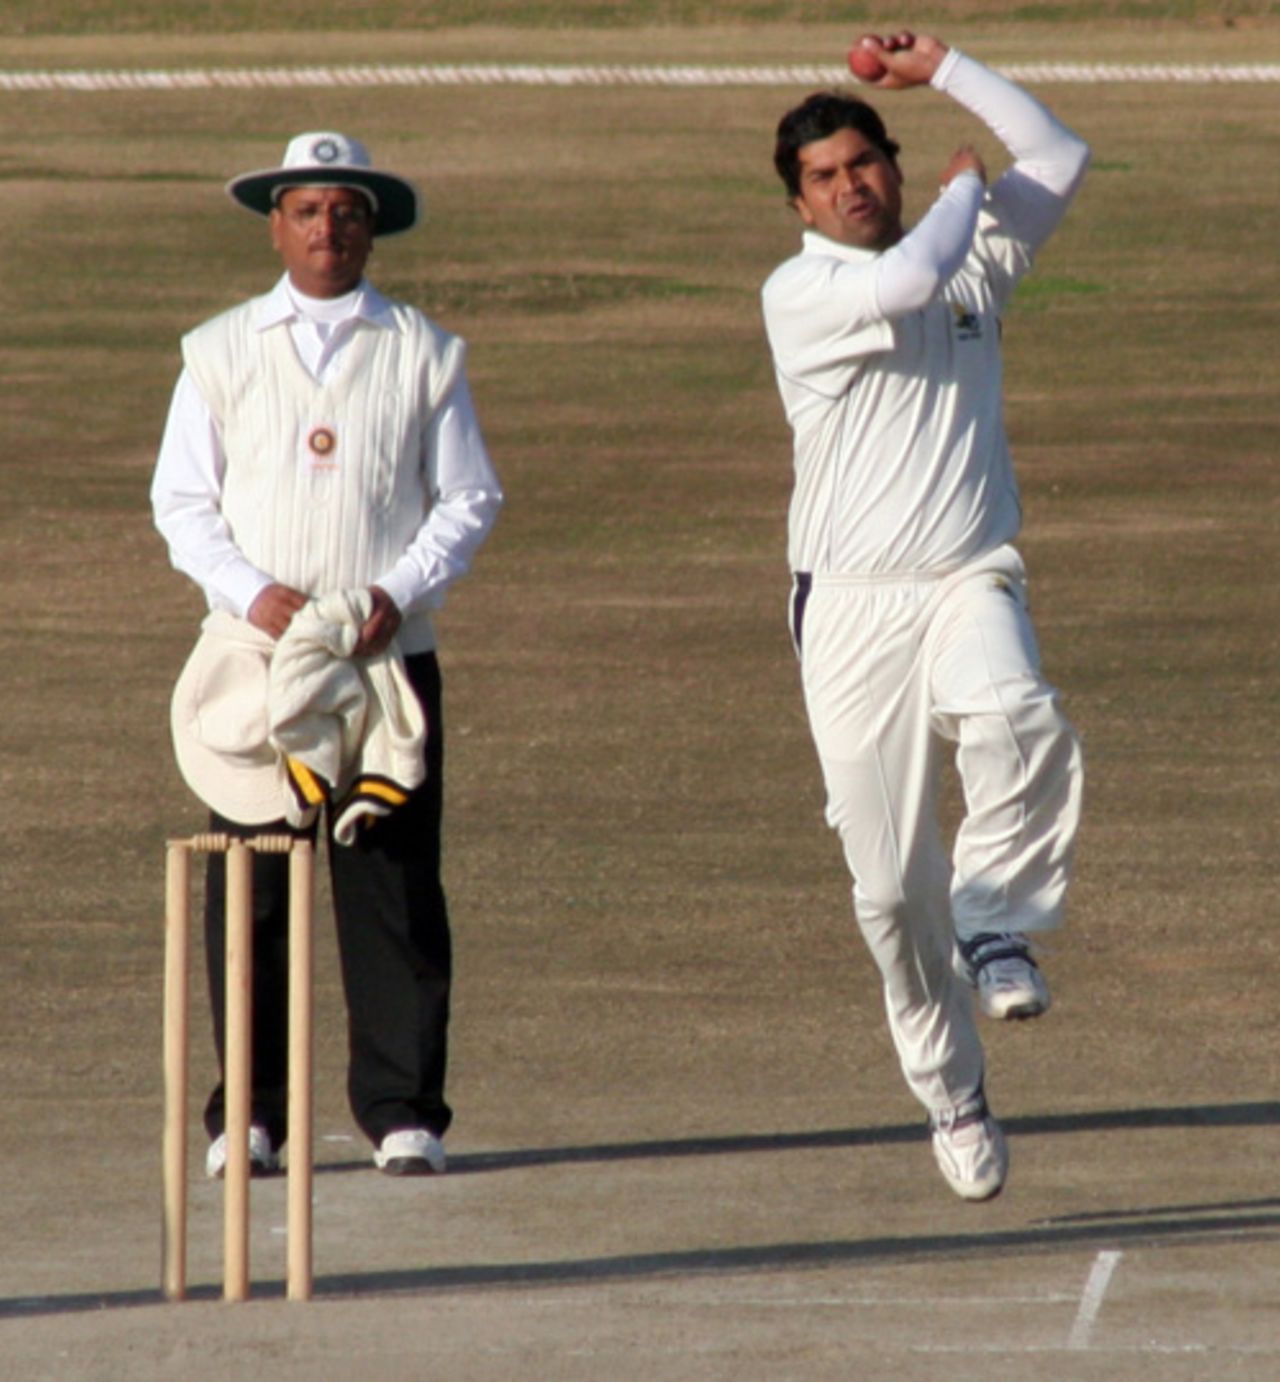 Himachal Pradesh's Ashok Thakur in his delivery stride, Himachal Pradesh v Rajasthan, Ranji Trophy Super League, Group A, 7th round, 2nd day, Dharamsala, December 26, 2007 
